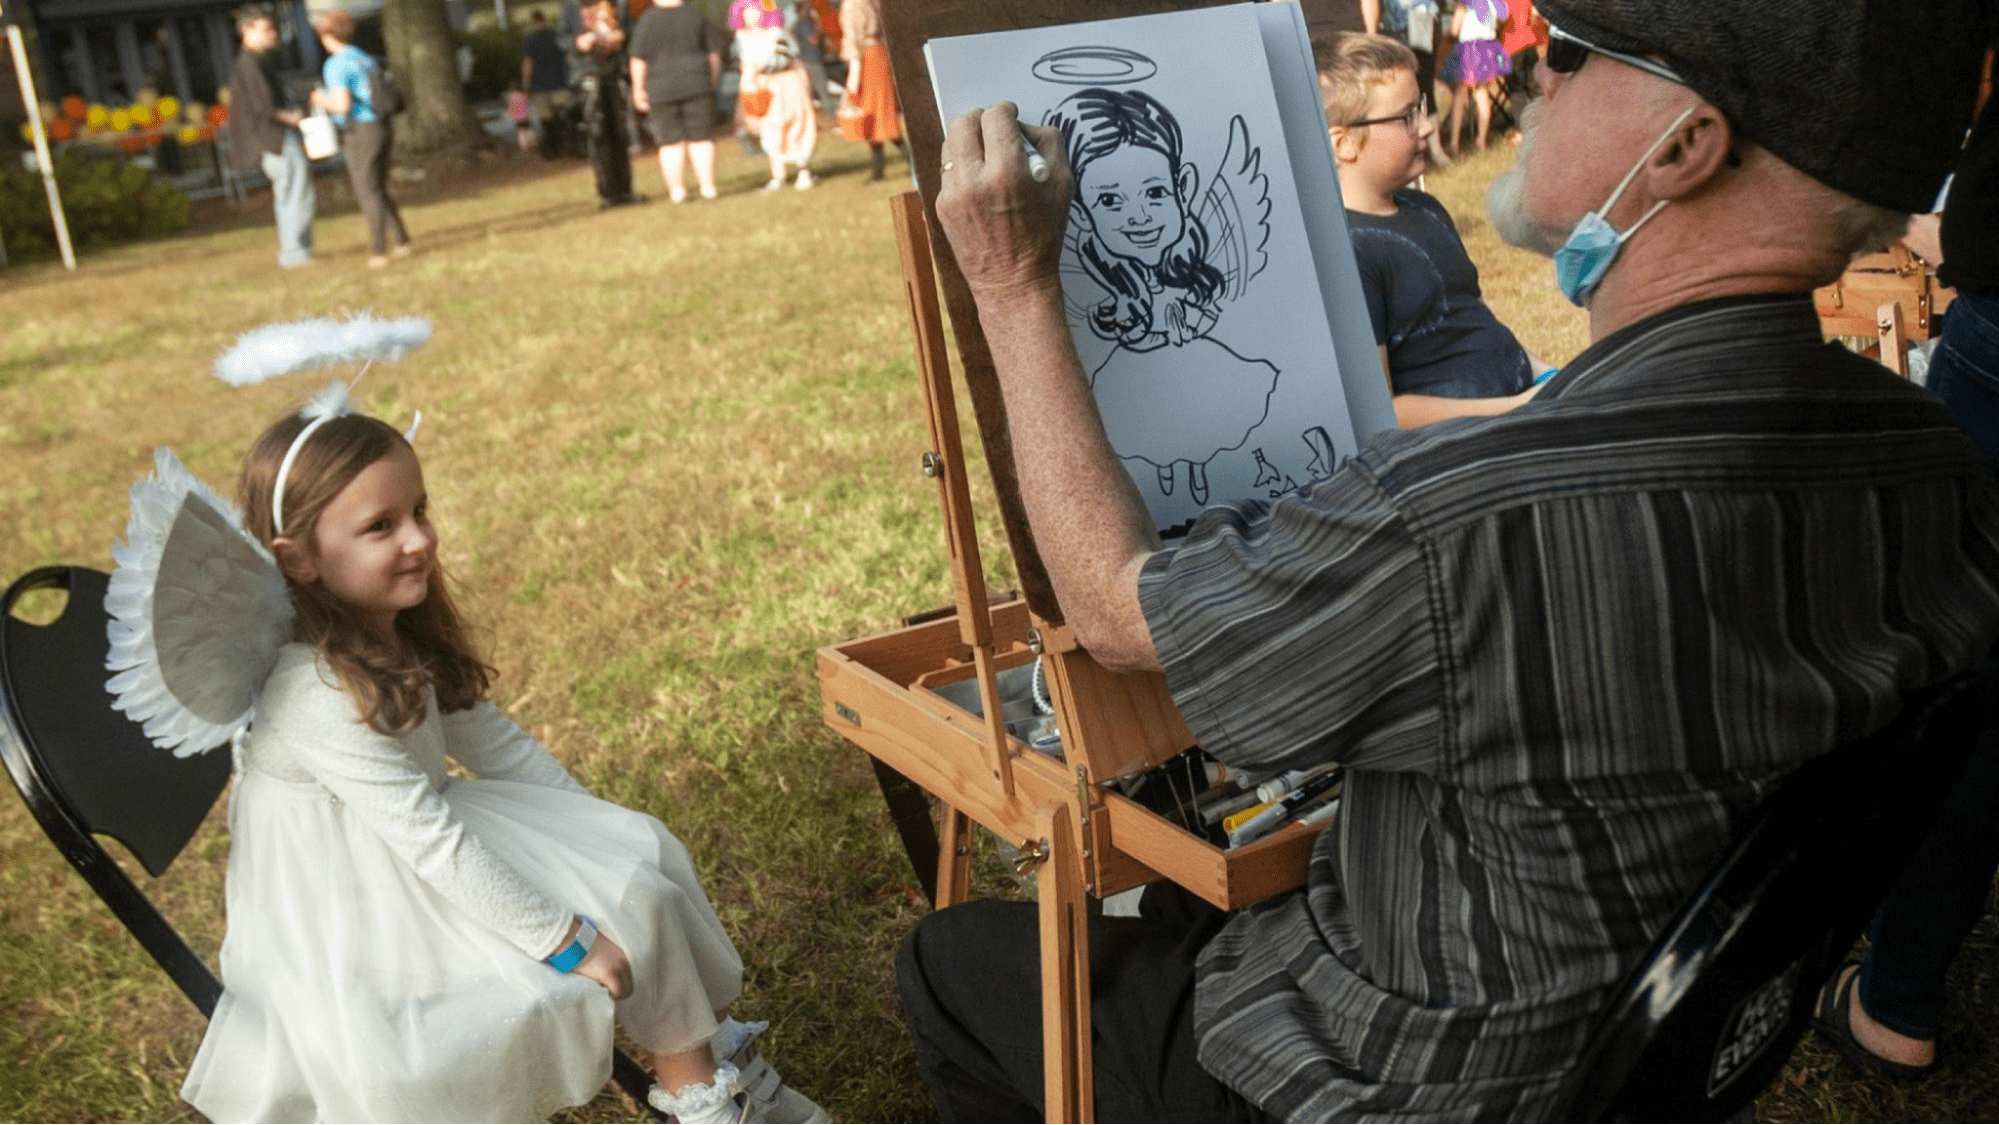 A caricature artist at a fall festival